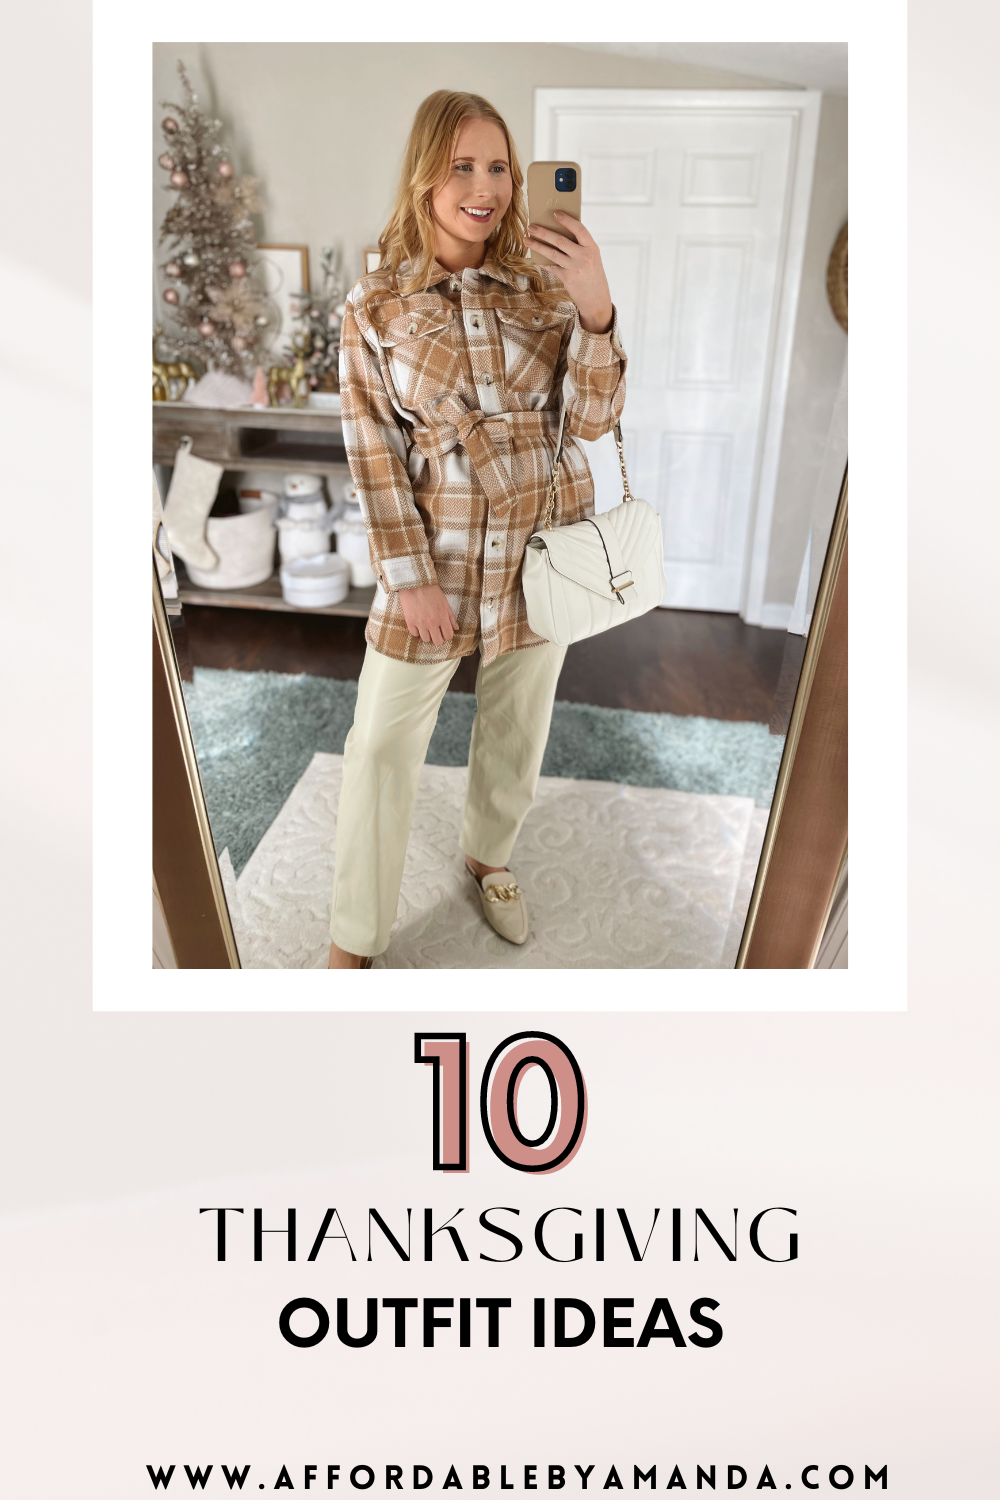 10 Thanksgiving Outfit Ideas 2022 - Affordable by Amanda